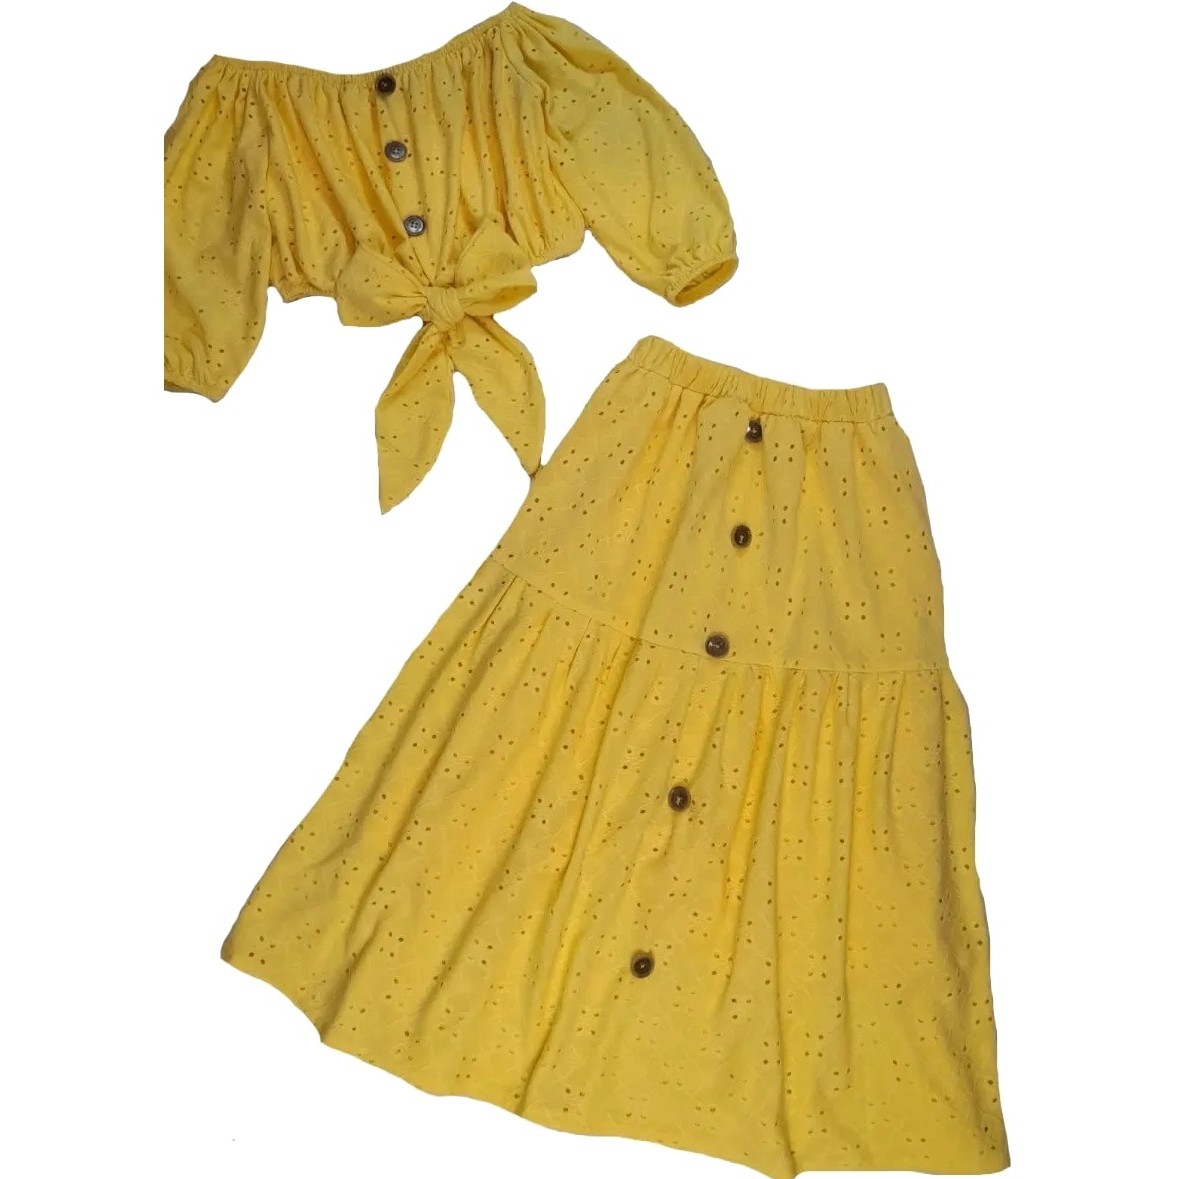 Bow Front Peasant Blouse & Skirt Set